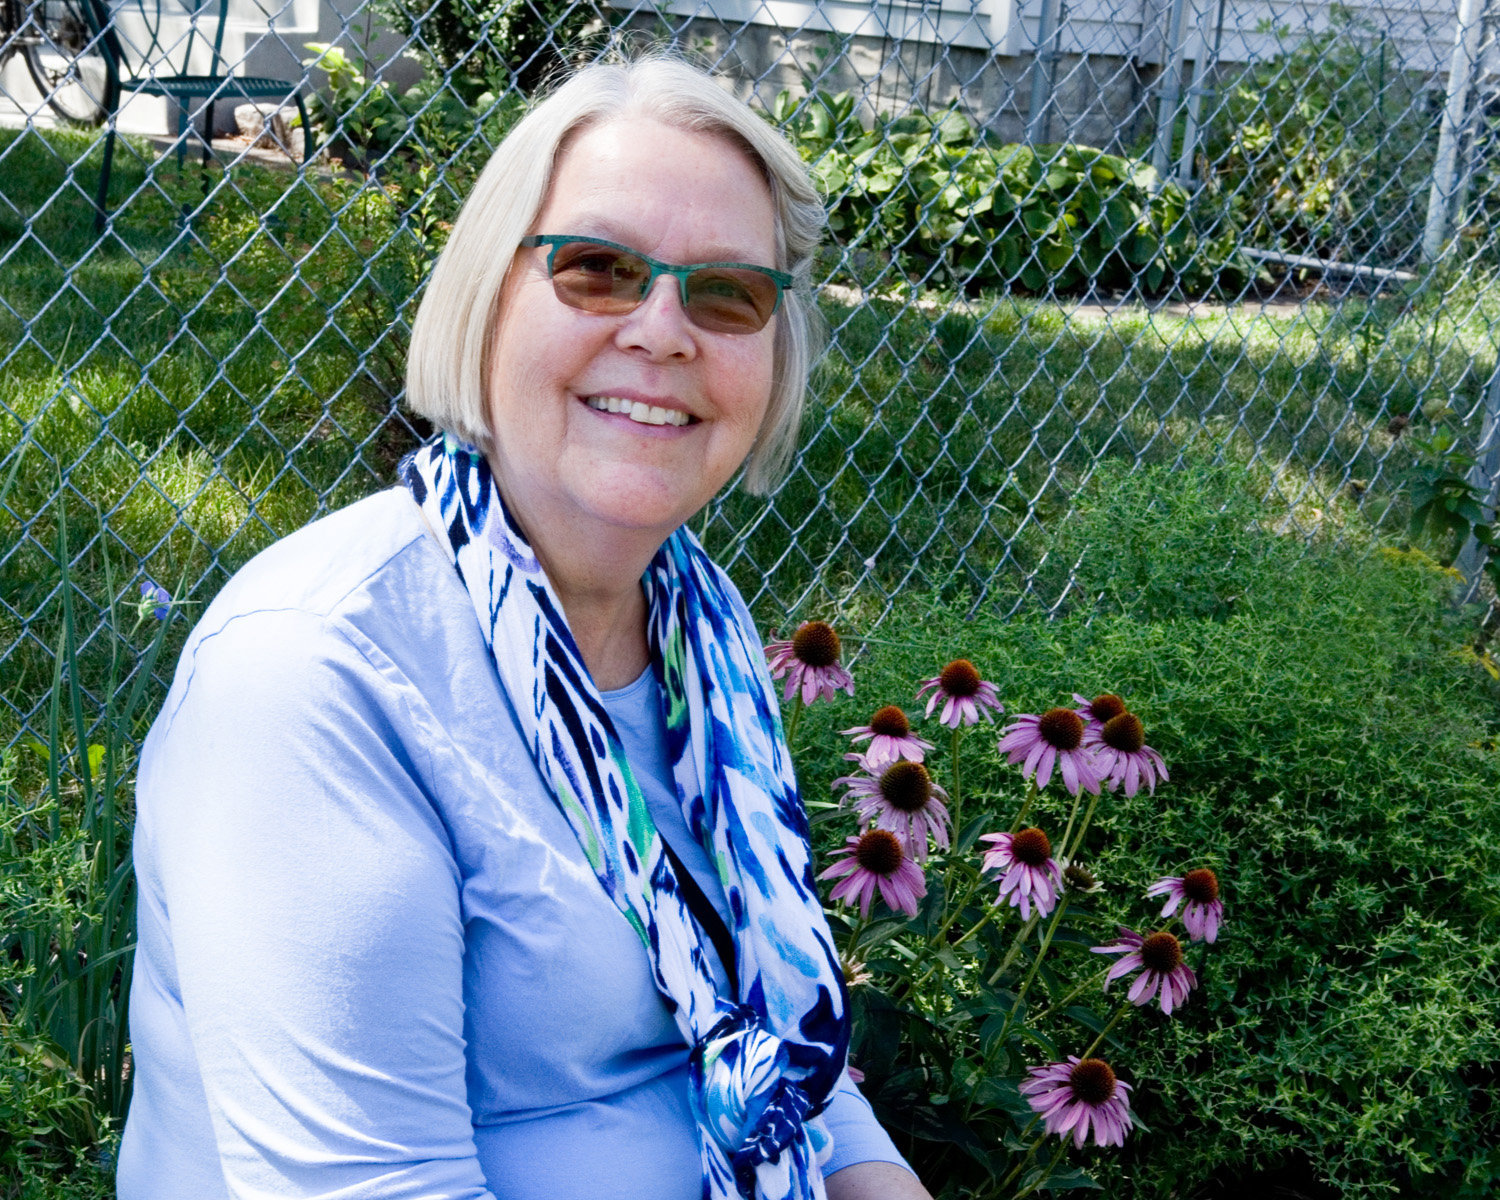 Linda Kjerland was a Garden for Wildlife mentee in her first year of developing a backyard habitat for wildlife. (Photo by Margie O’Loughlin)